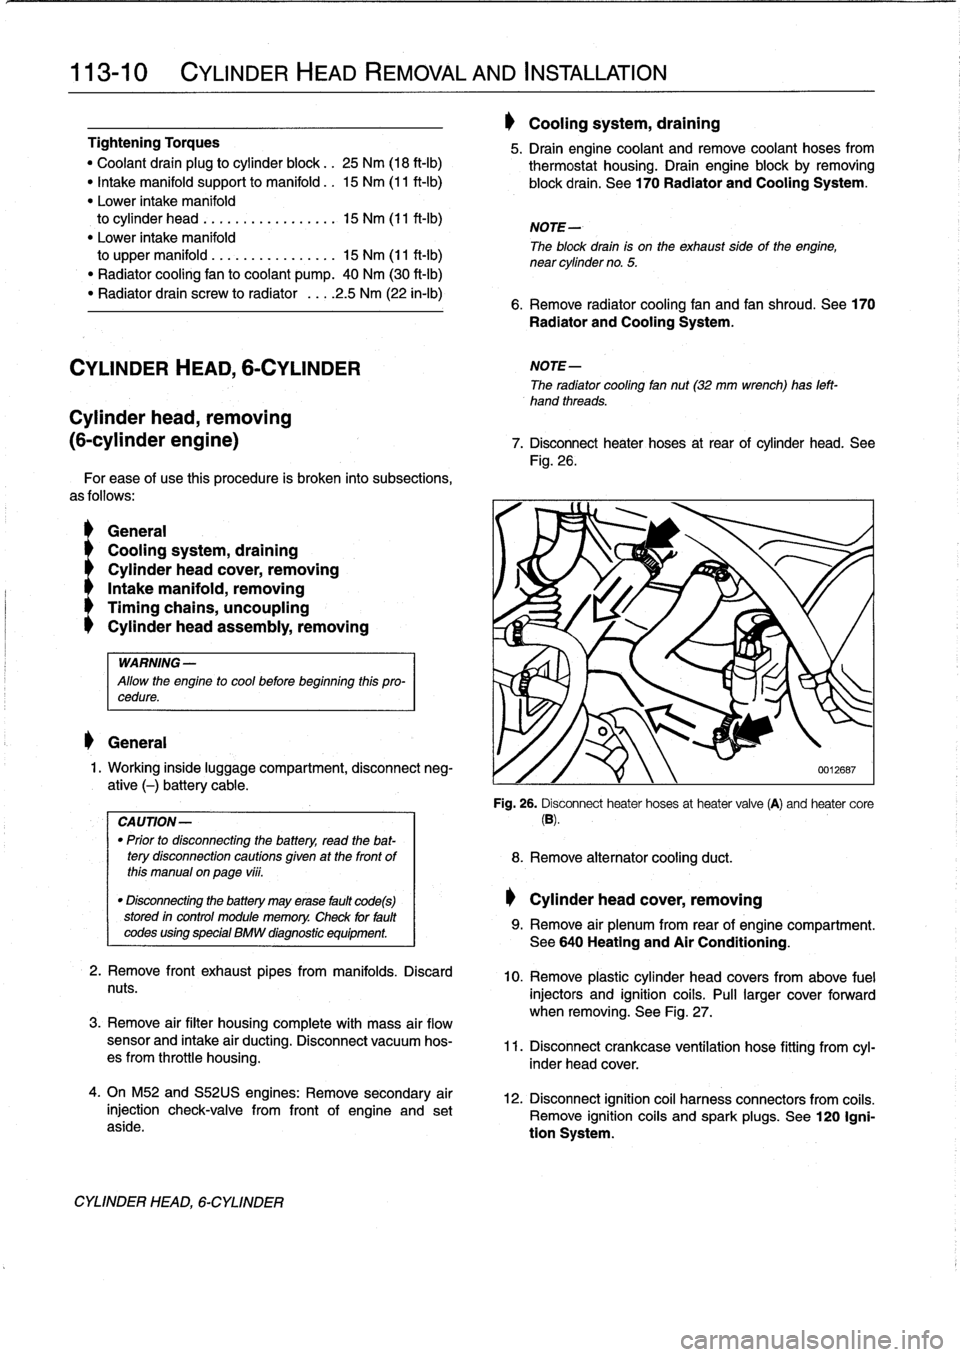 BMW 328i 1994 E36 Service Manual 
113-10

	

CYLINDER
HEAD
REMOVAL
AND
INSTALLATION

Tightening
Torques

"
Coolant
drain
plug
to
cylinder
block
.
.
25
Nm
(18
ft-1b)

"
Intake
manifold
support
to
manifold
.
.
15
Nm
(11
ft-Ib)

"
Lower